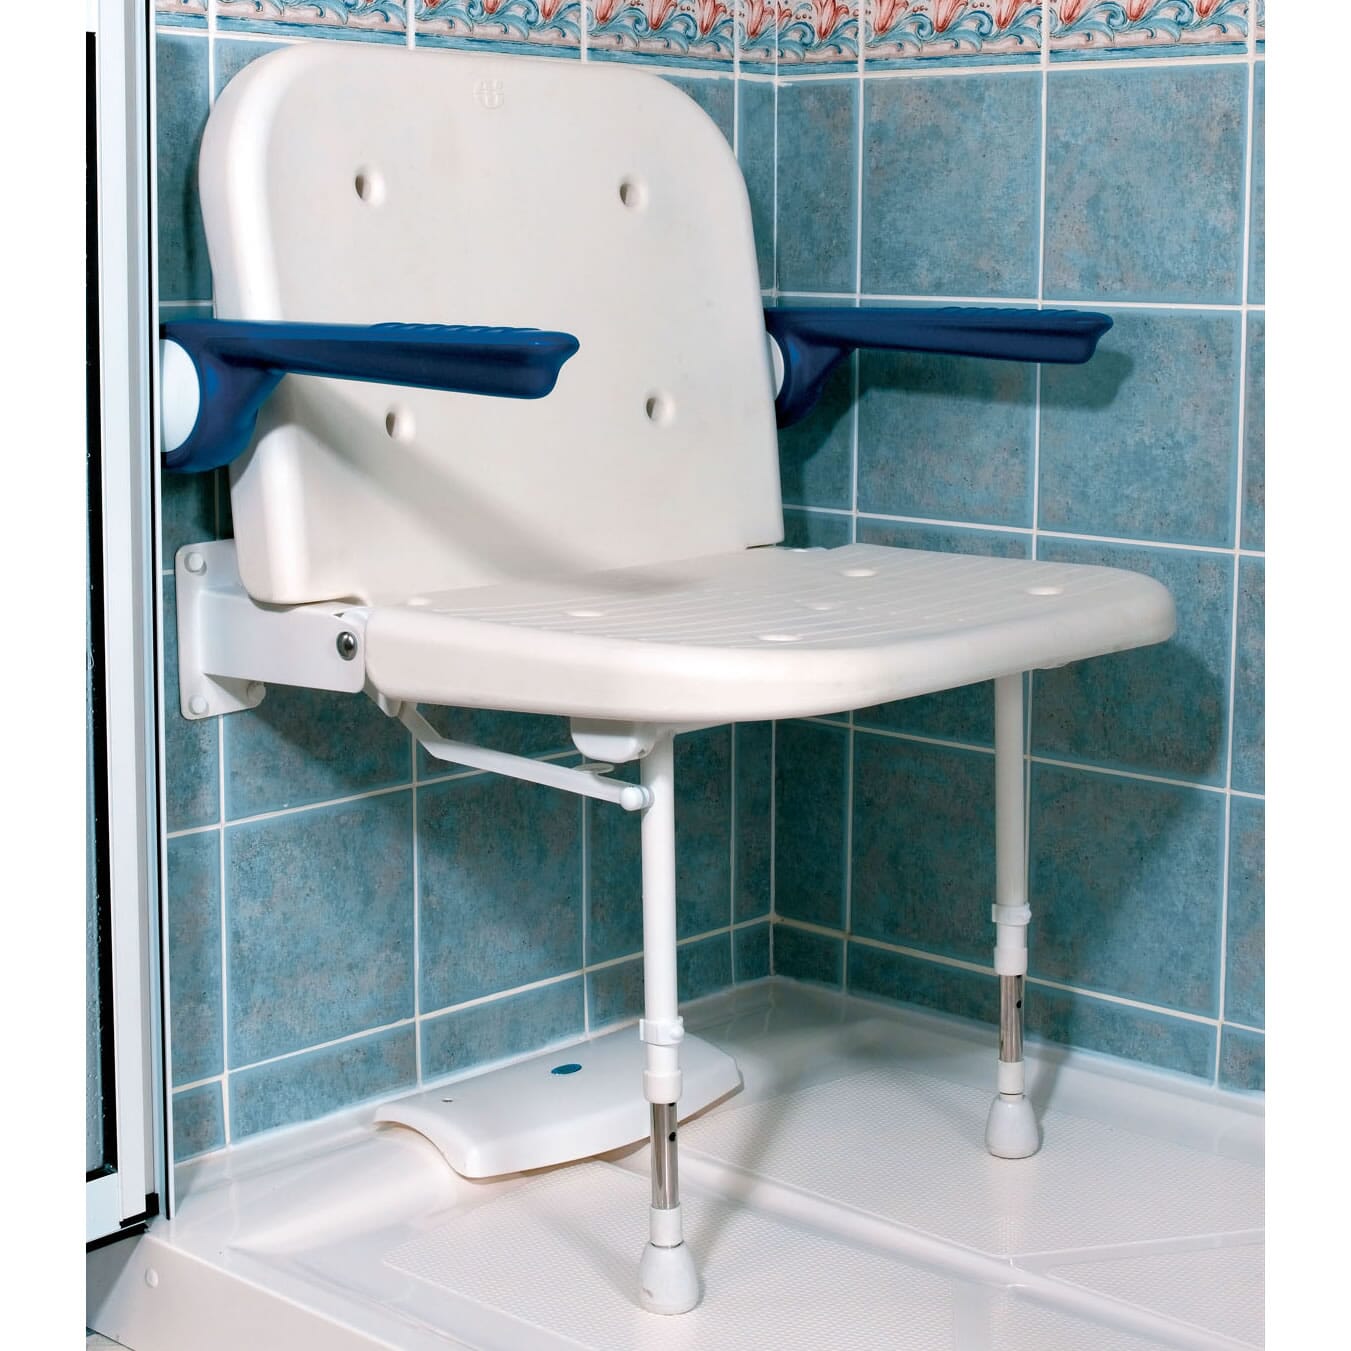 View Extra Wide Wall Mounted Shower Seat with Padded Arms information